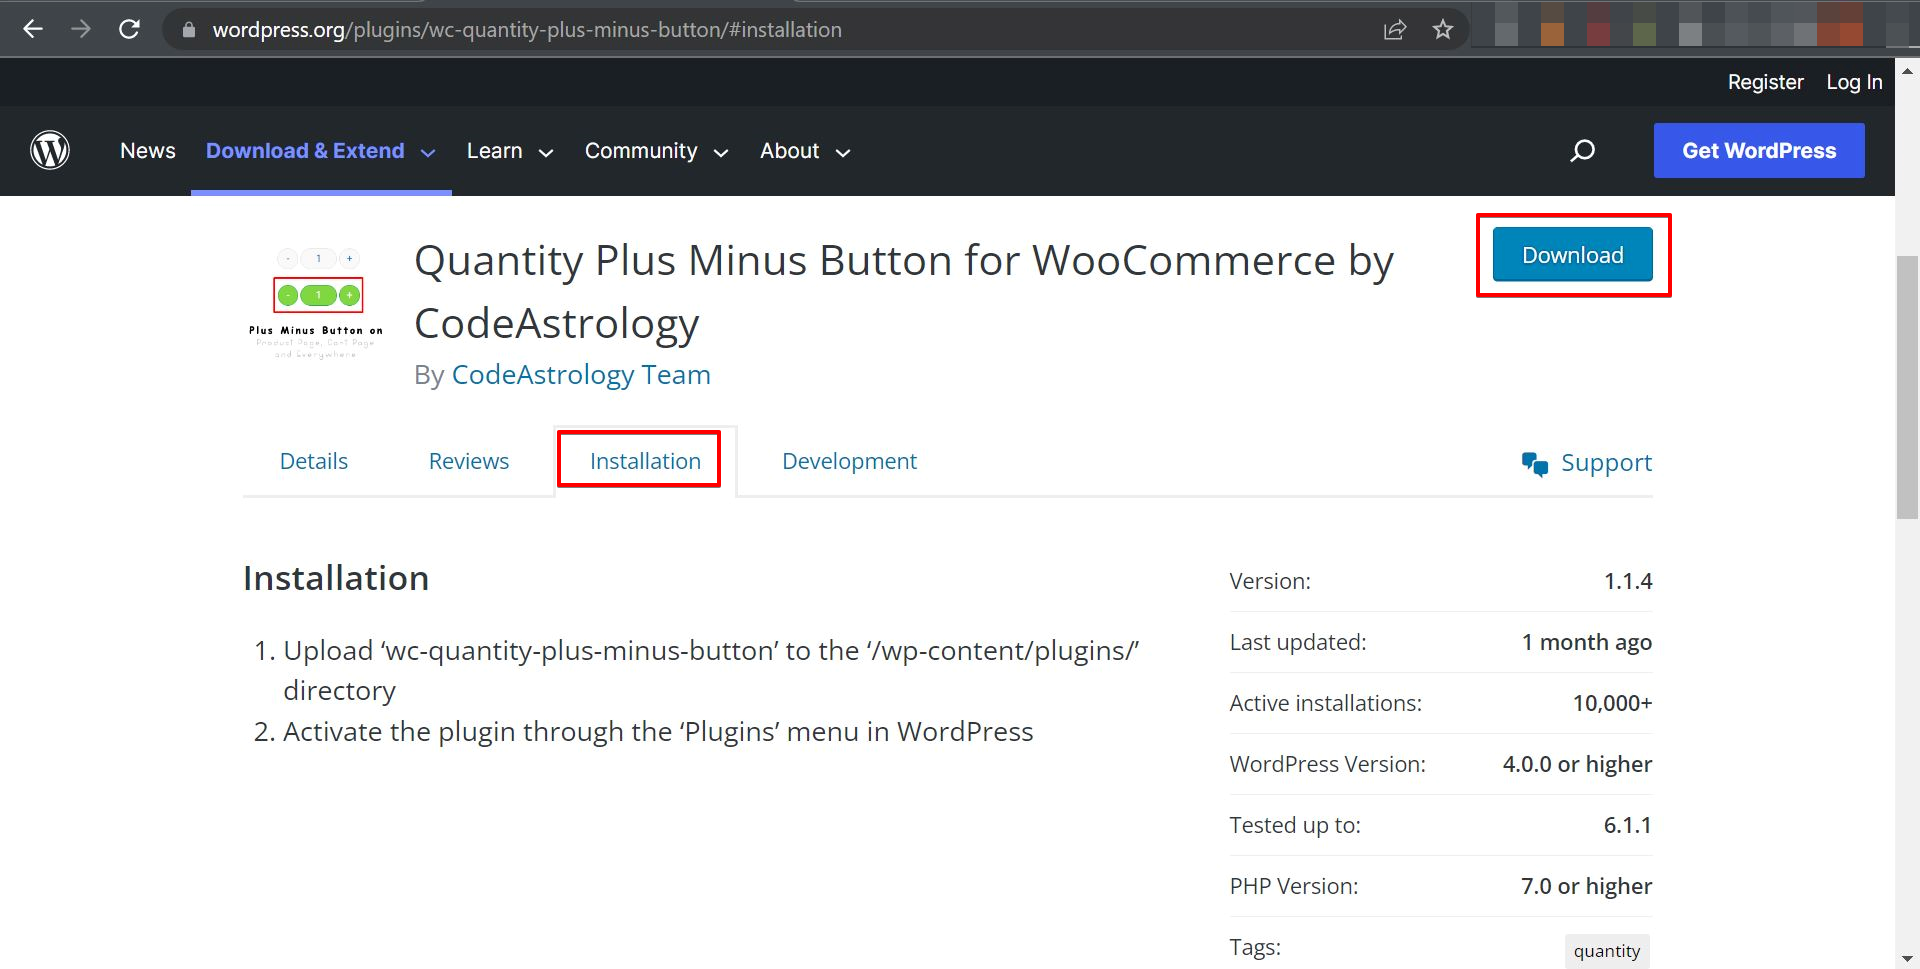 Install Quantity Plus Minus Button for WooCommerce